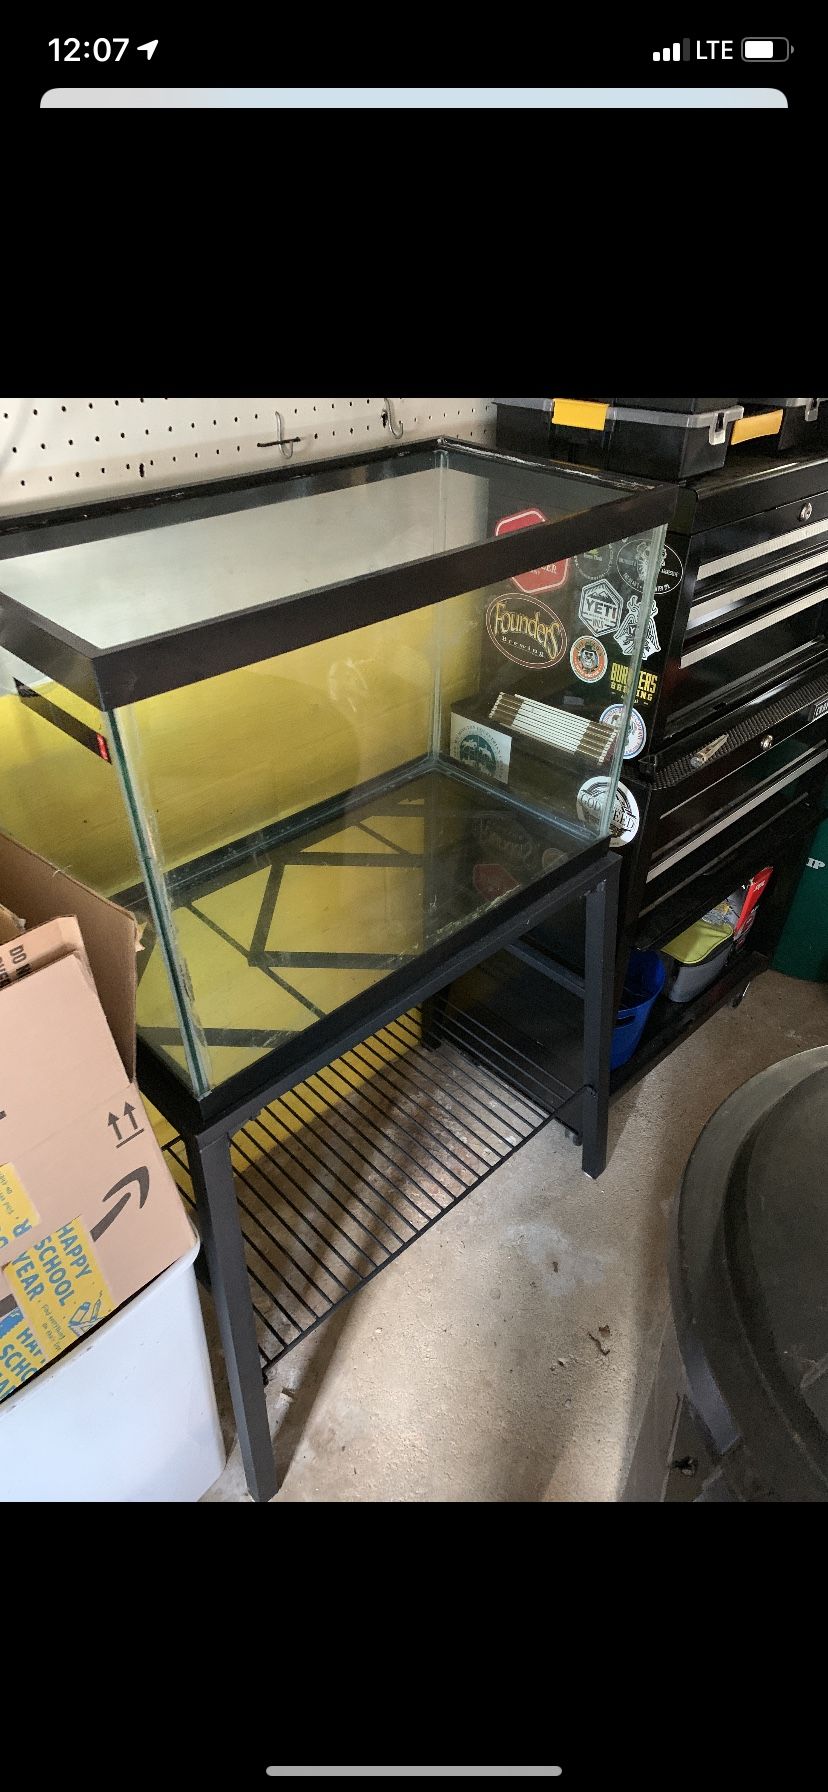 Fish tank with stand